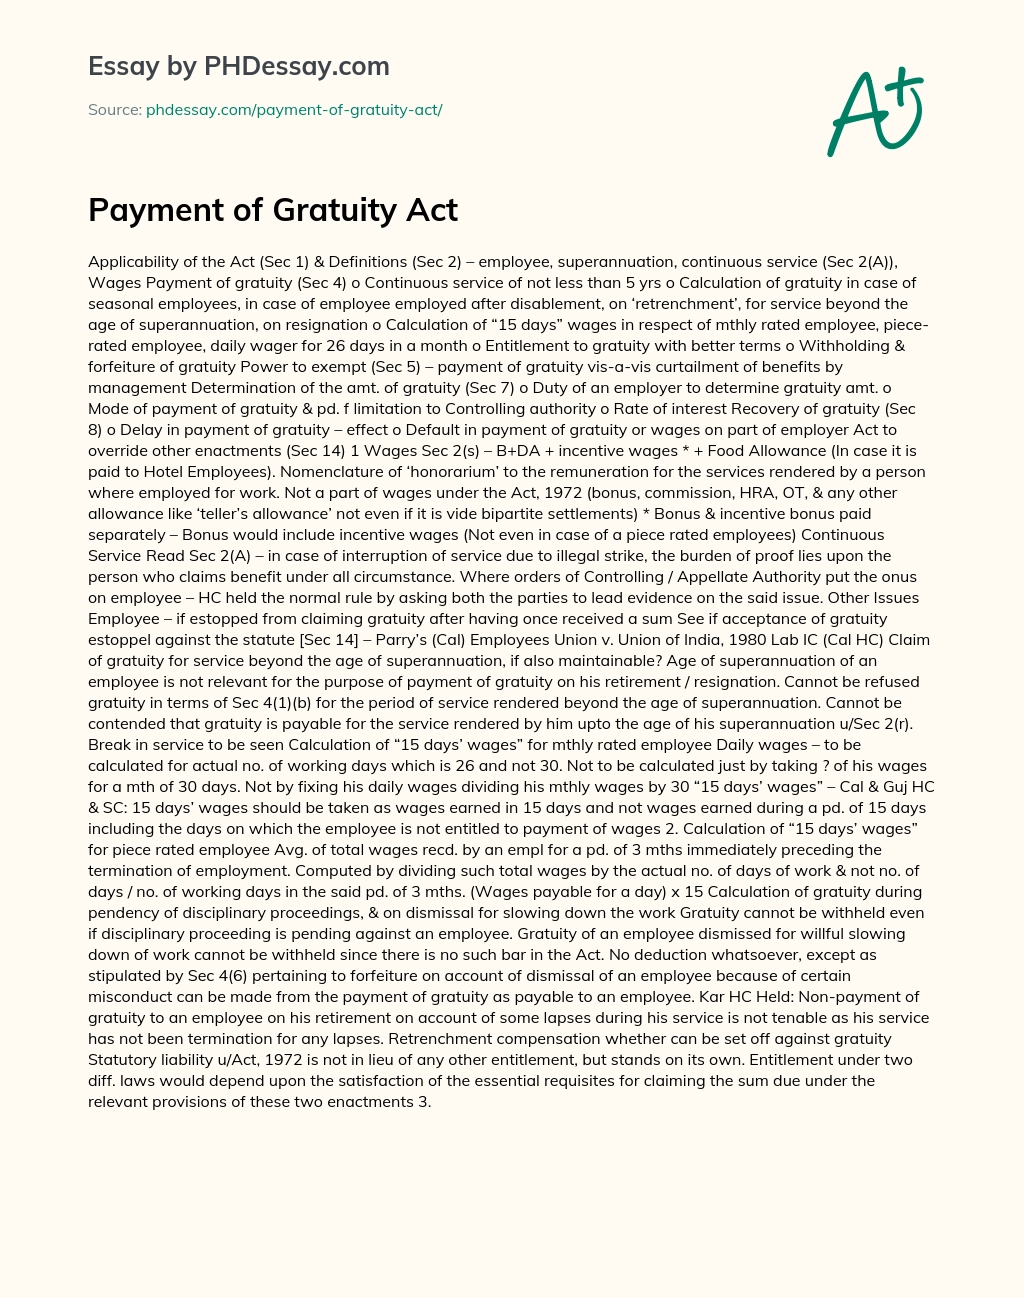 Payment of Gratuity Act essay